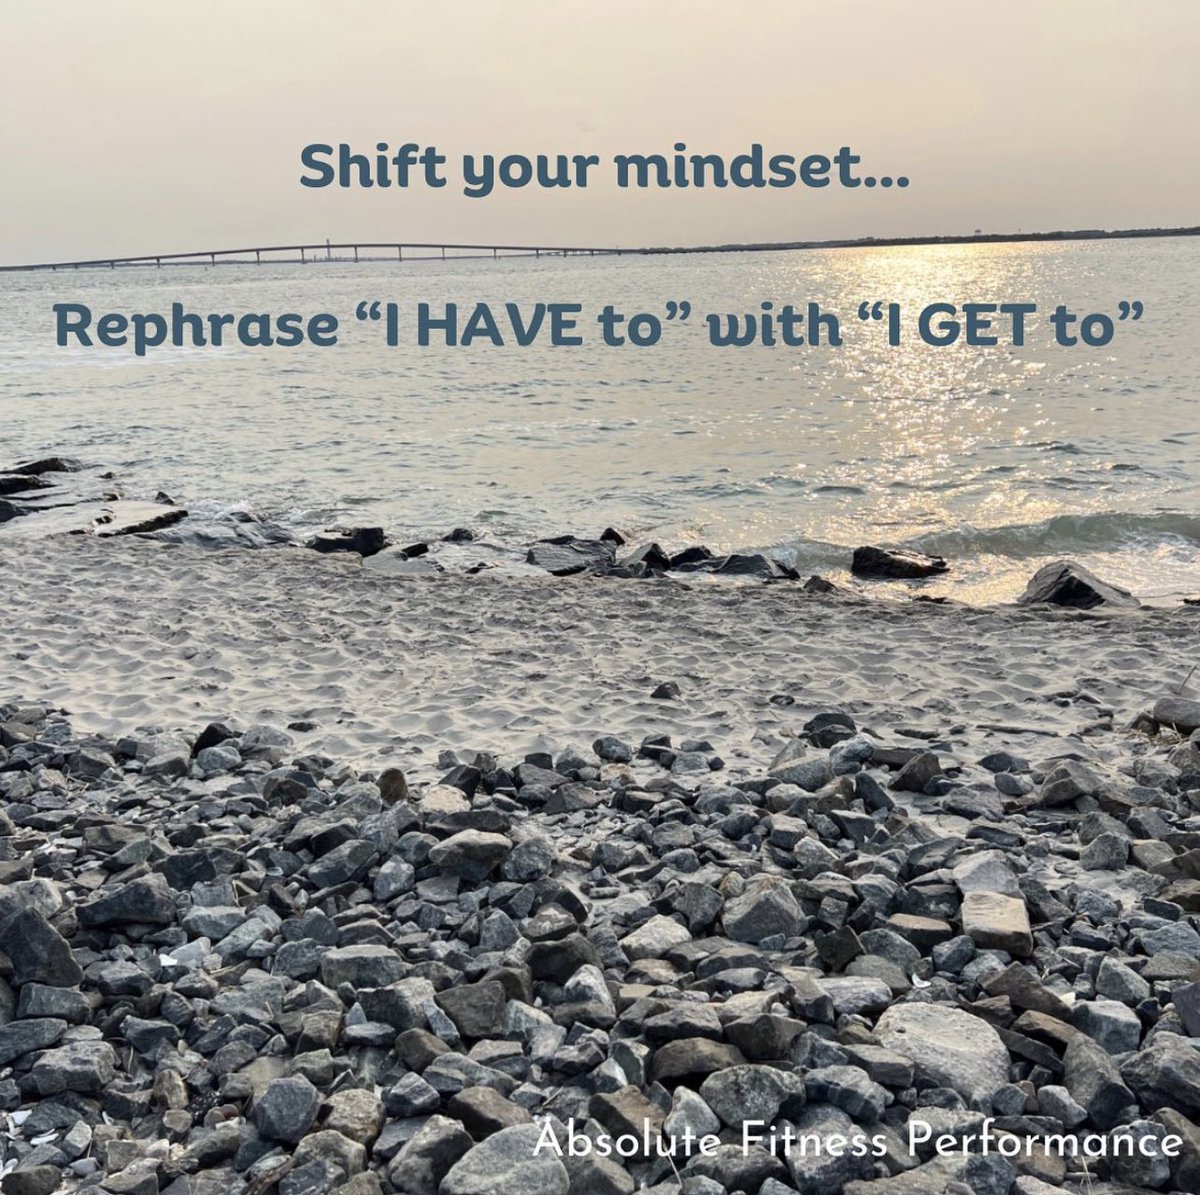 One simple phrase can change your mindset...AND your outlook on the day!

The next time you say “I have to...” change it to “I GET TO...” 

This change will remind you of the opportunities you have in your life & help you feel grateful! 

  #grateful #mindset #shiftyourmindset